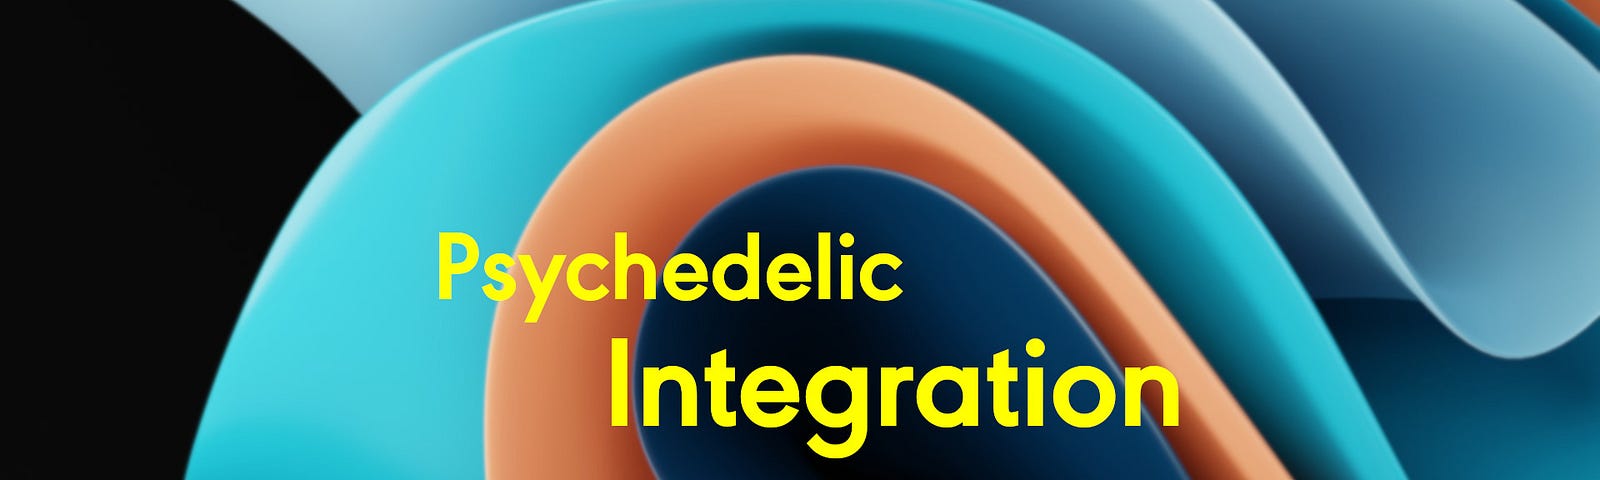 what is psychedelic integration